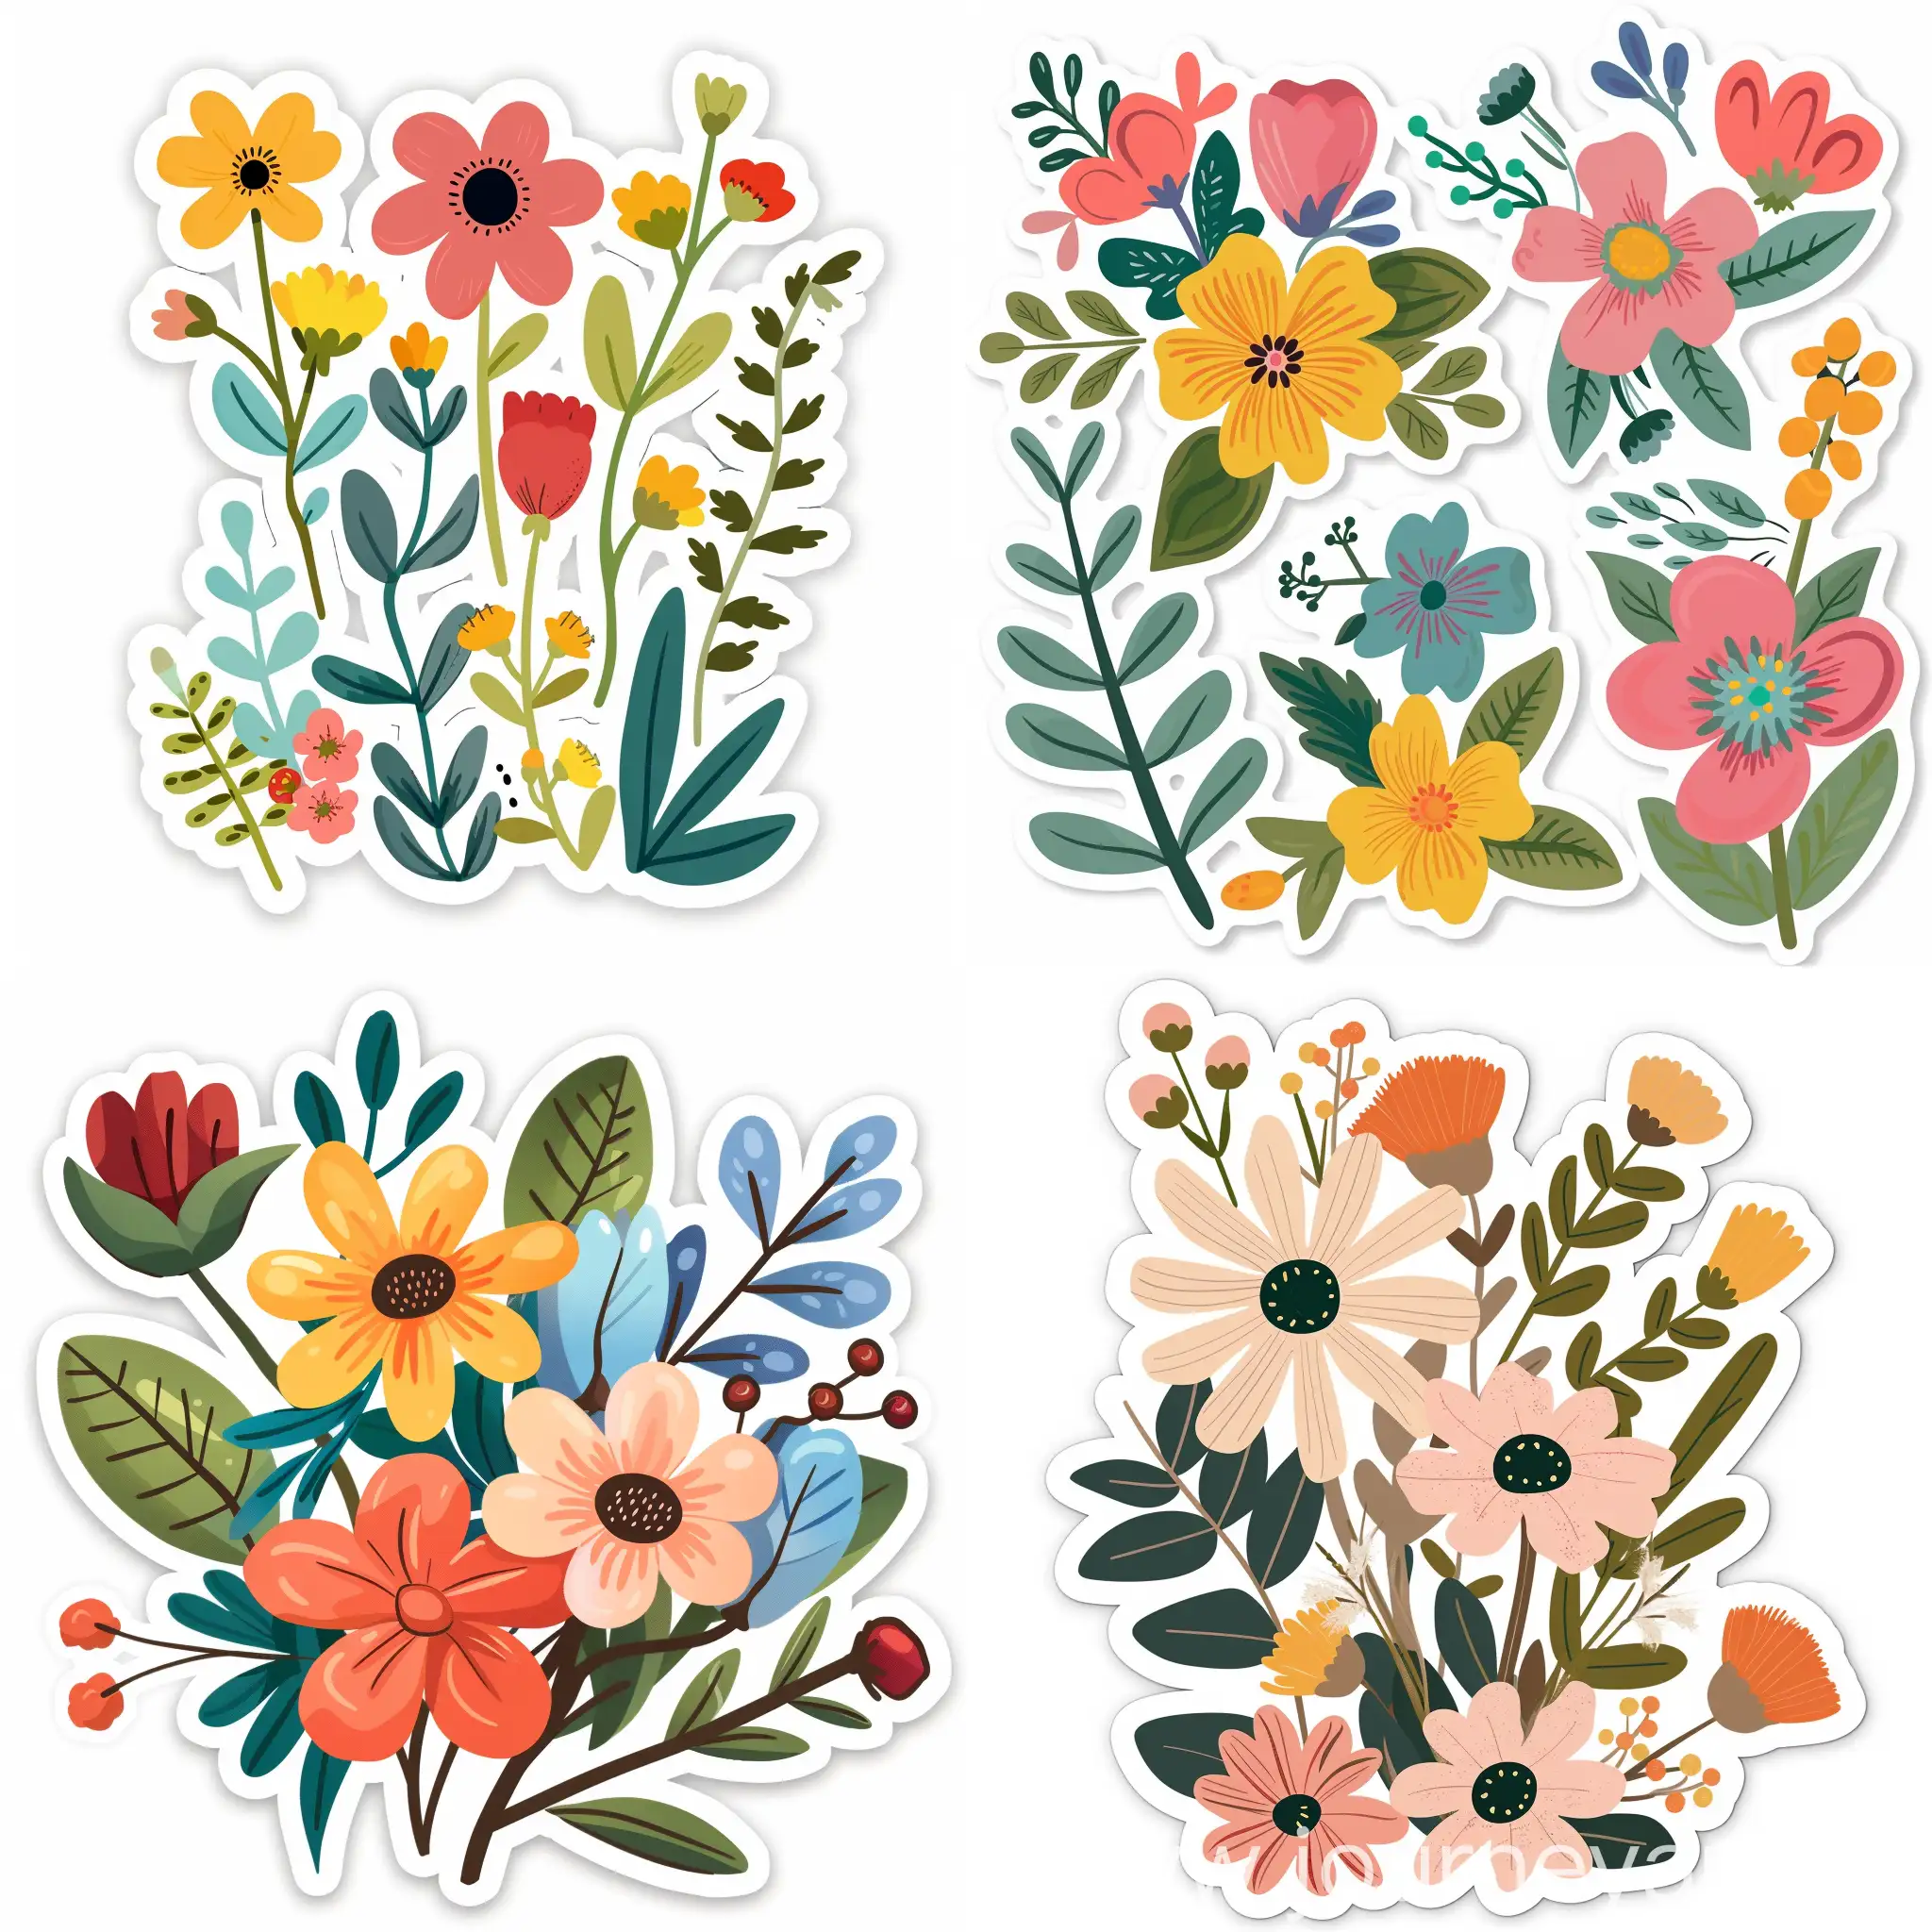 Simple-Flat-Style-Flowers-Sticker-Design-with-HighQuality-Details